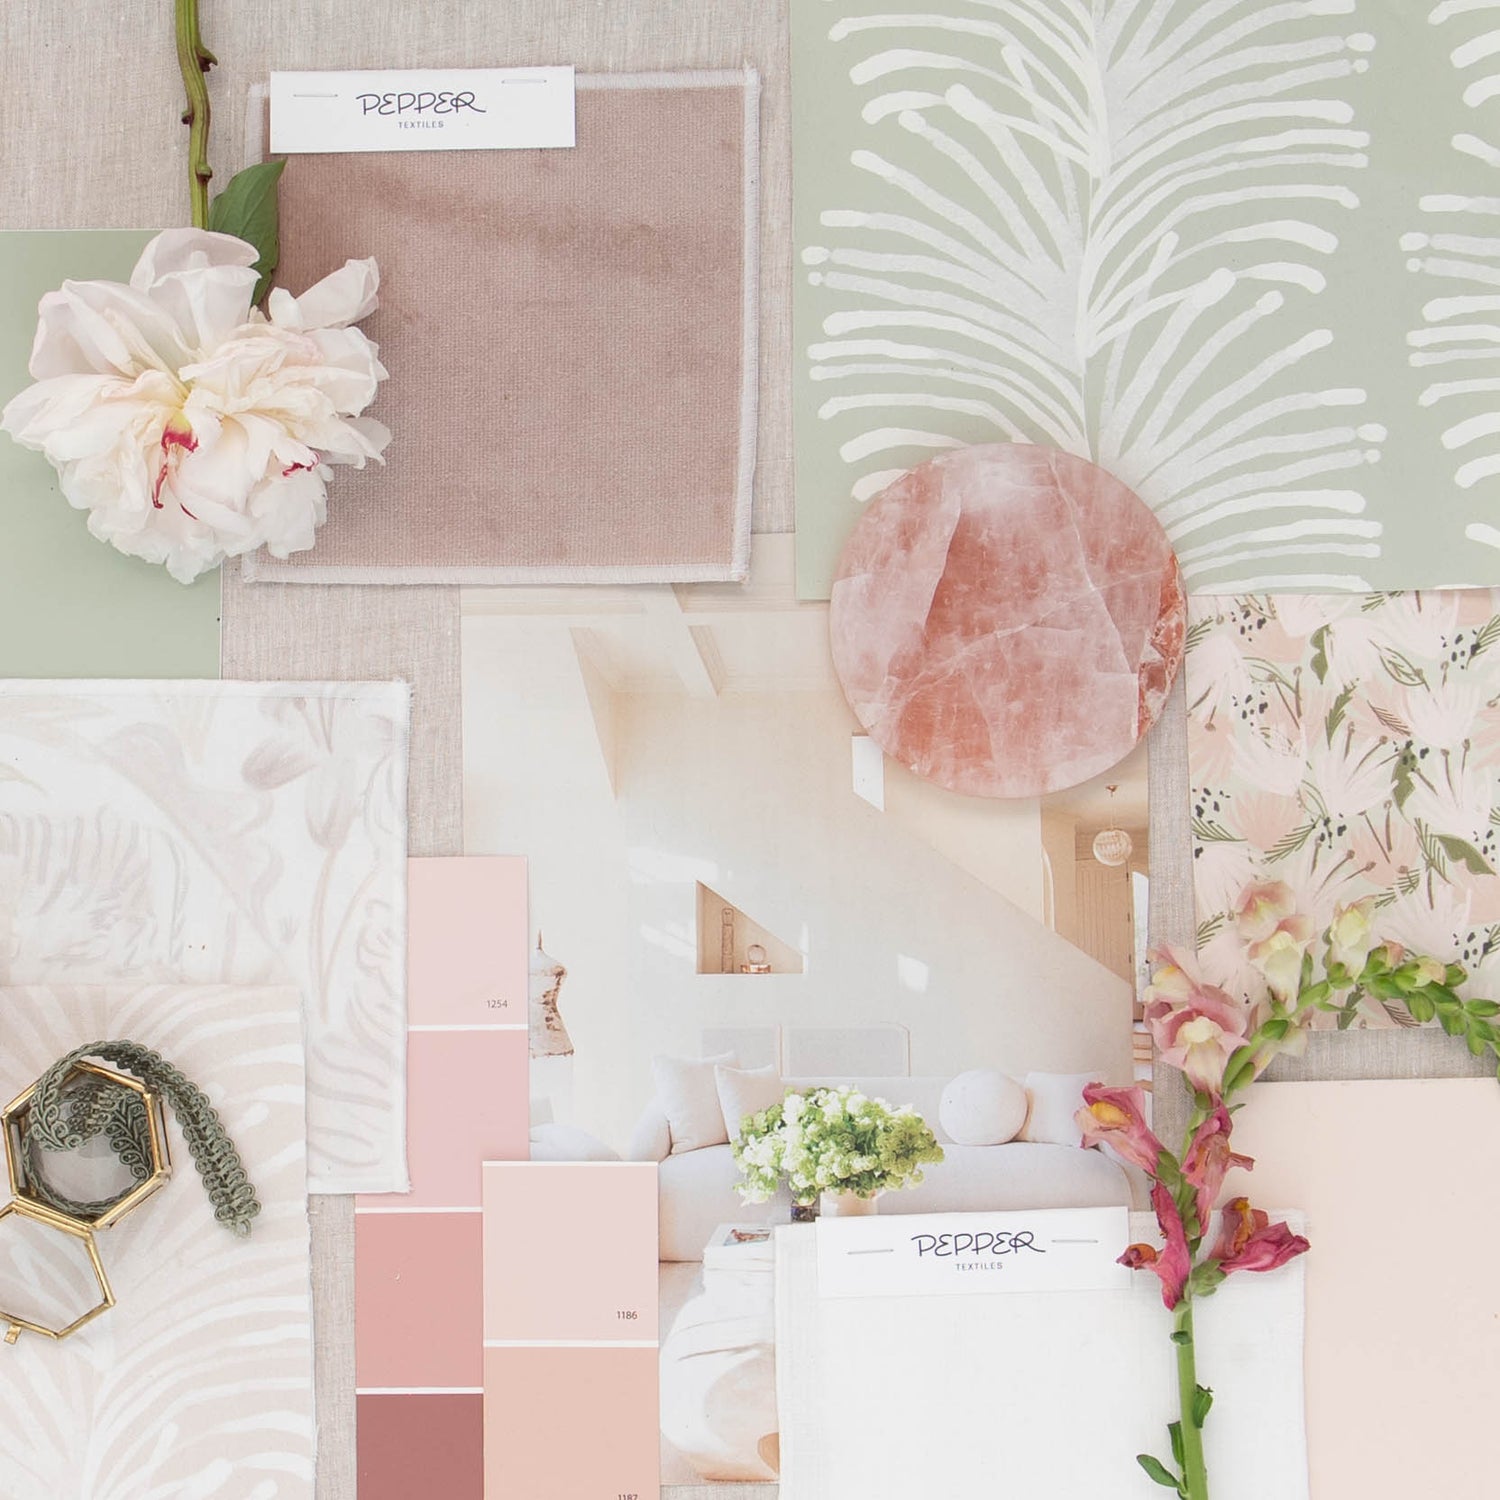 Interior design moodboard and fabric inspirations with Beige Botanical Stripe Printed Swatch, Green Botanical Stripe Printed Swatch, and Pink Velvet swatch